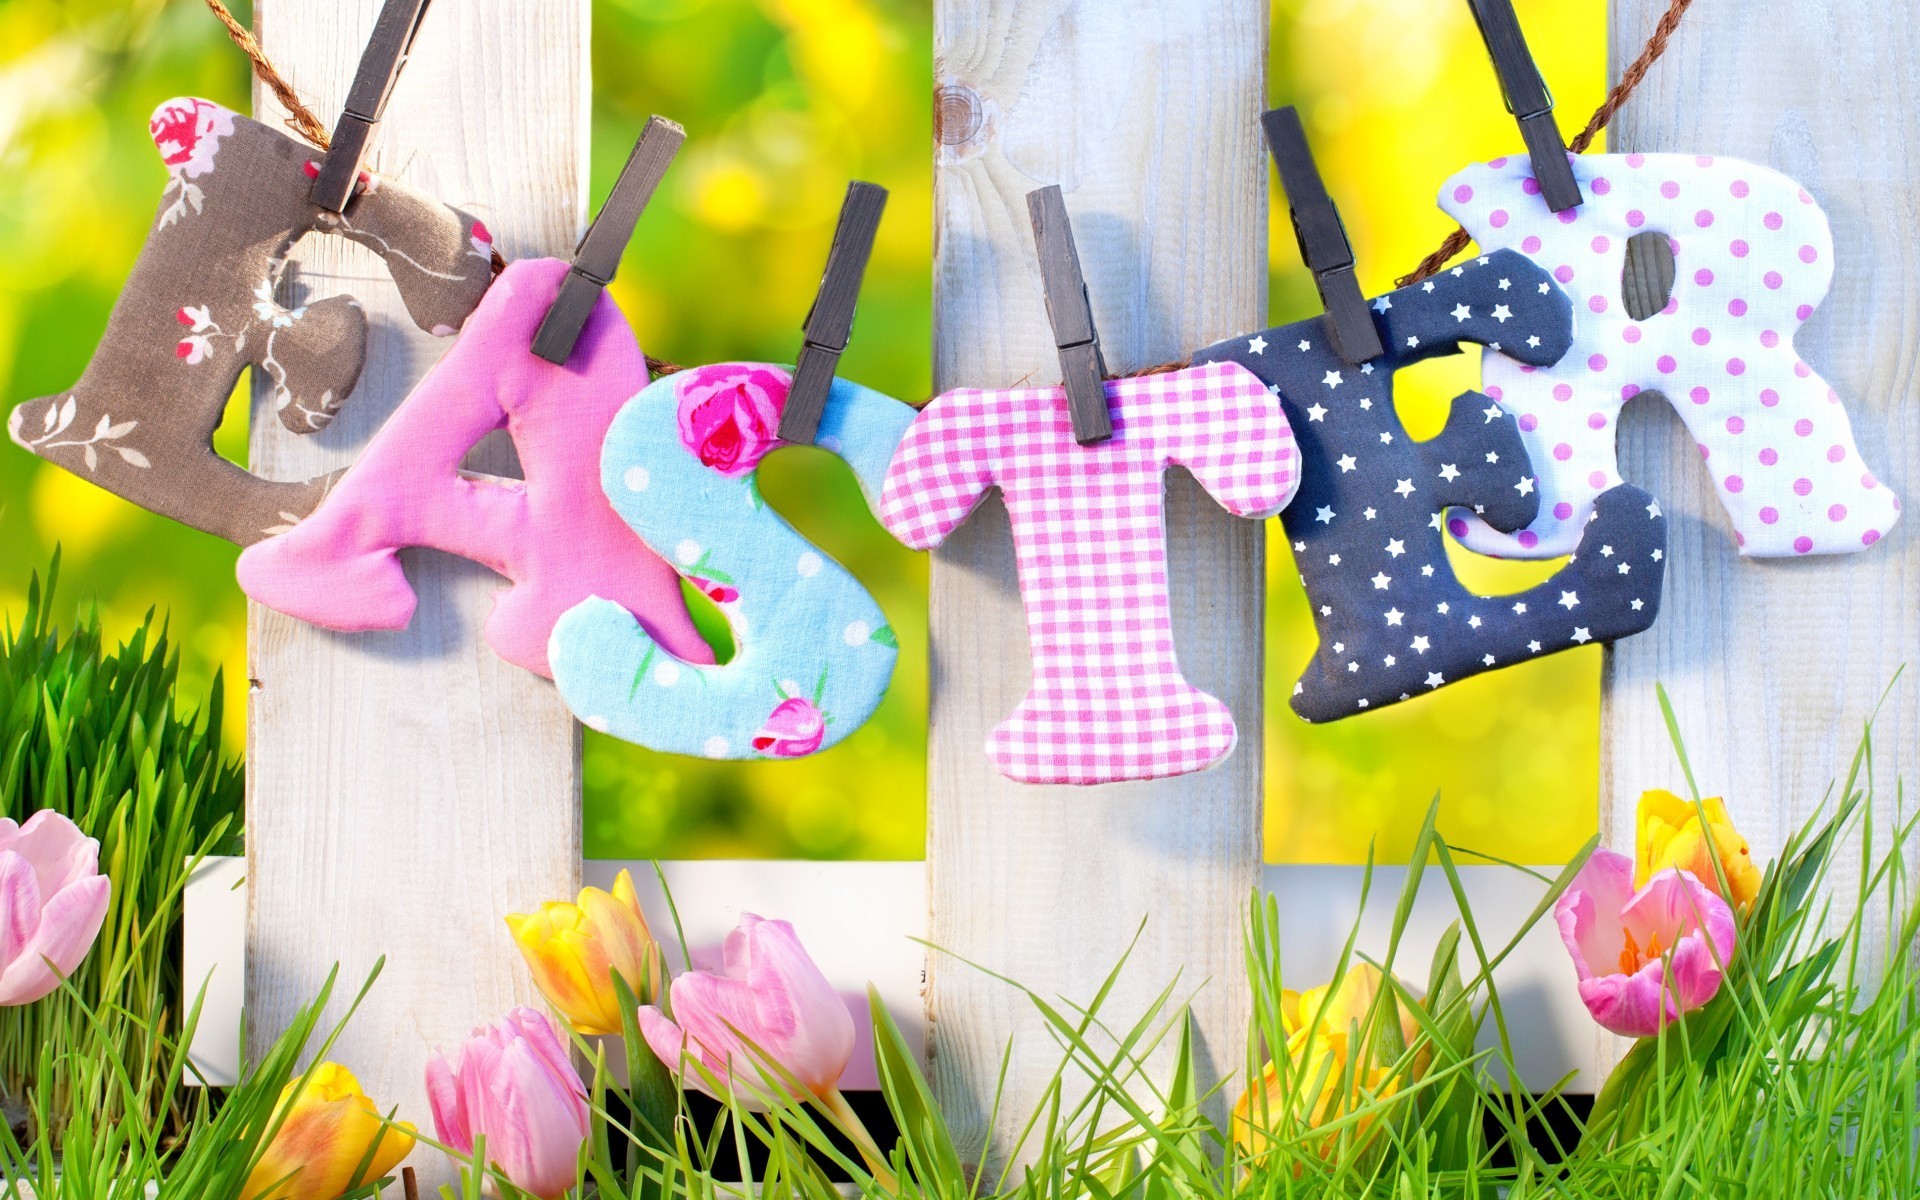 1920x1200 1920x1080 Tag: HDQ Easter Wallpapers, Backgrounds and Pictures for Free,  Lyle Hirth for desktop and mobile